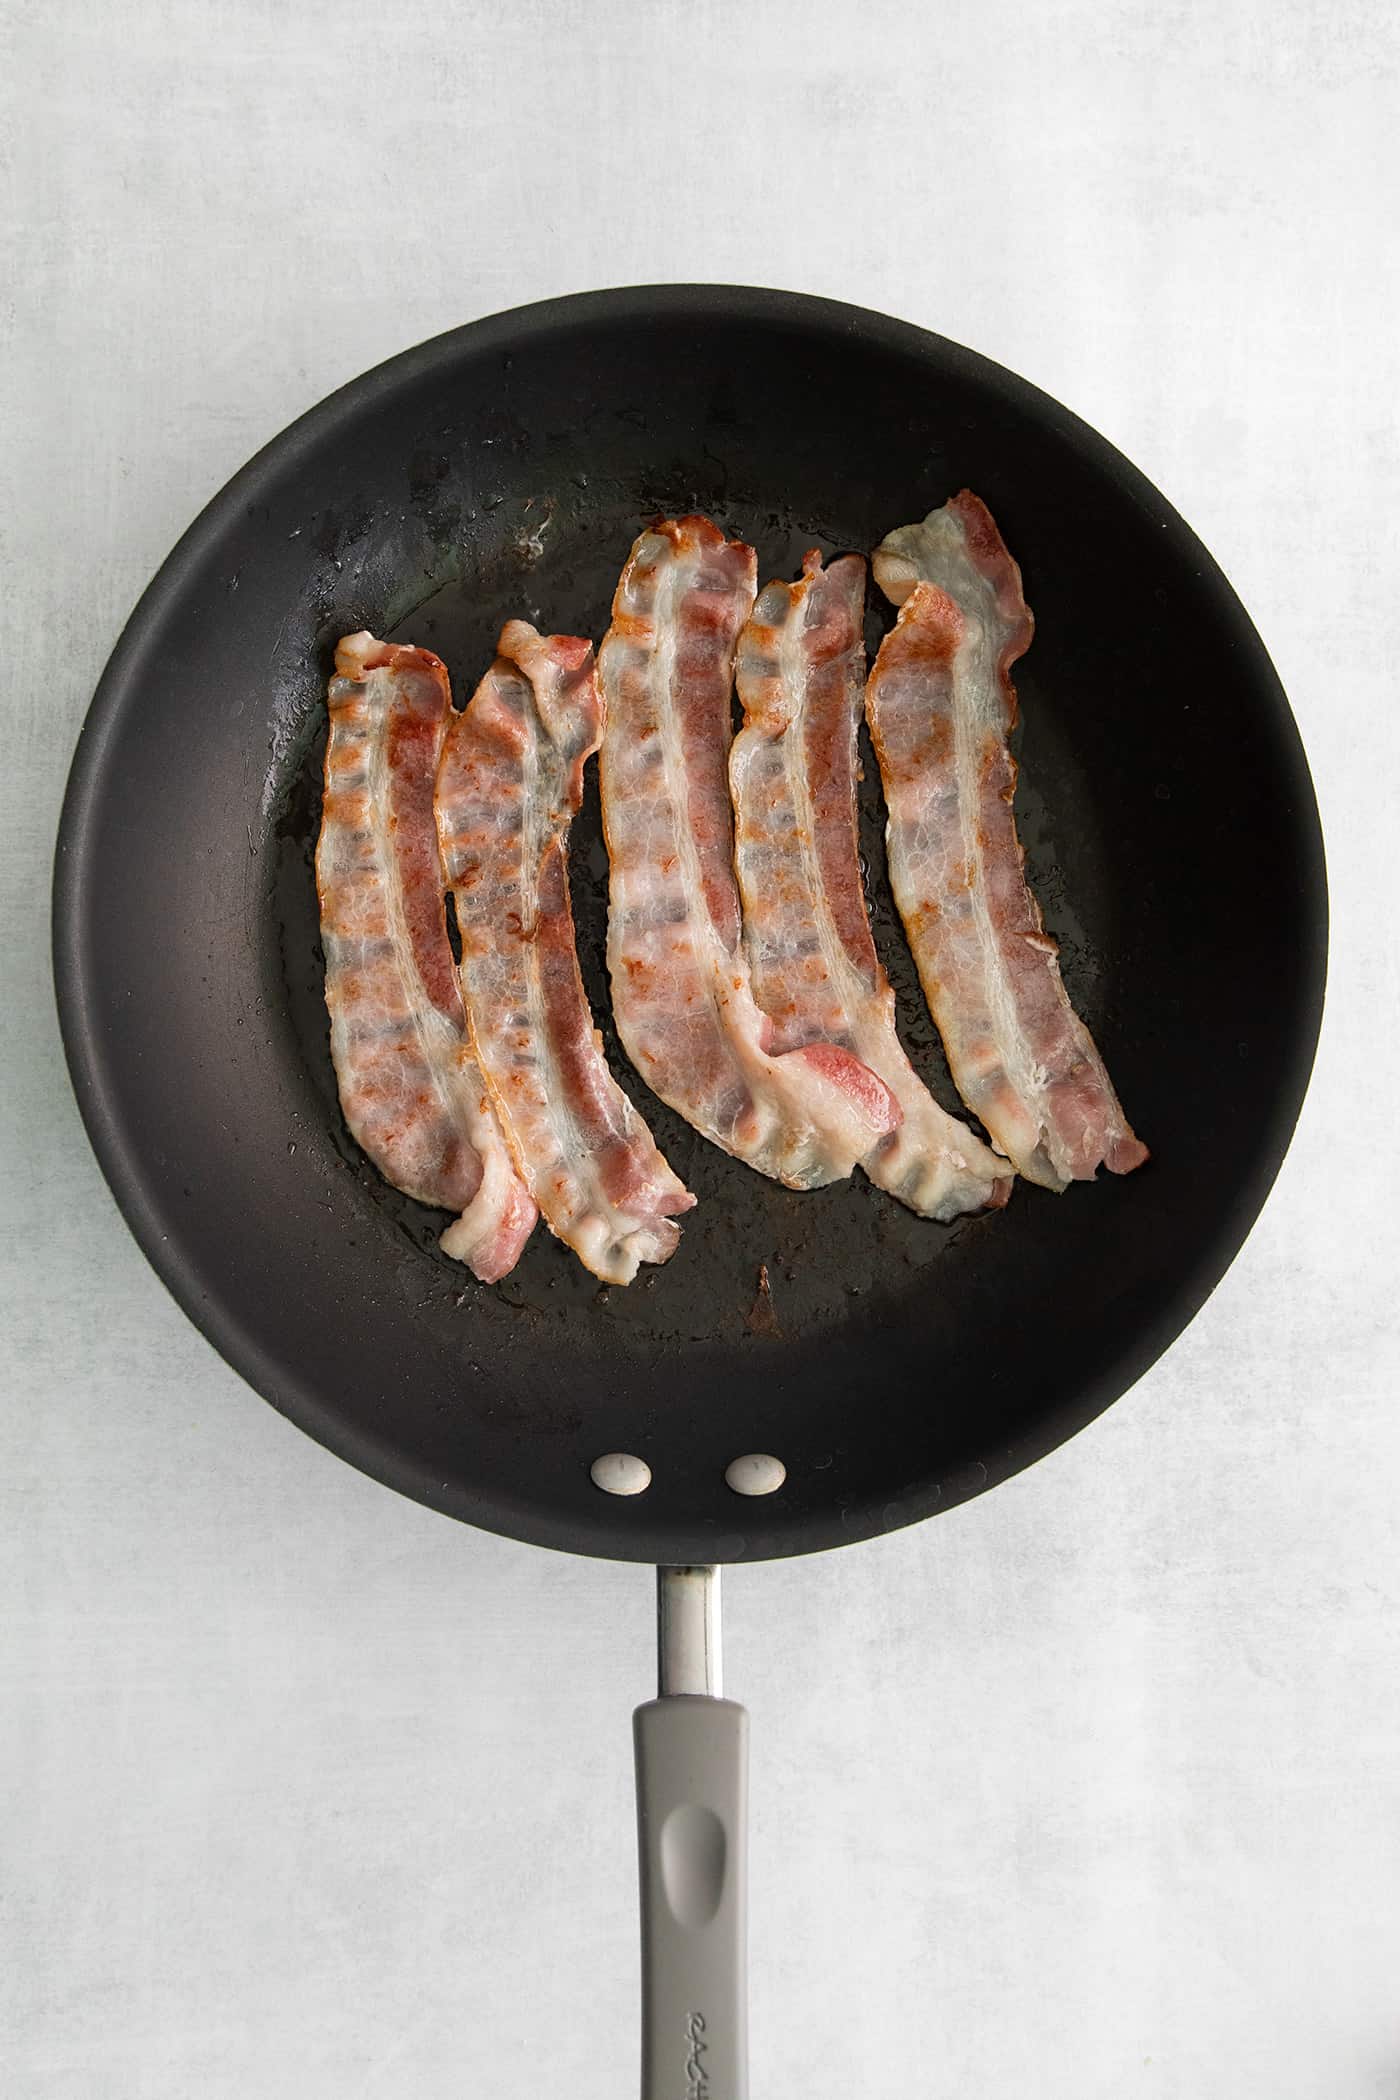 Slices of bacon in a frying pan